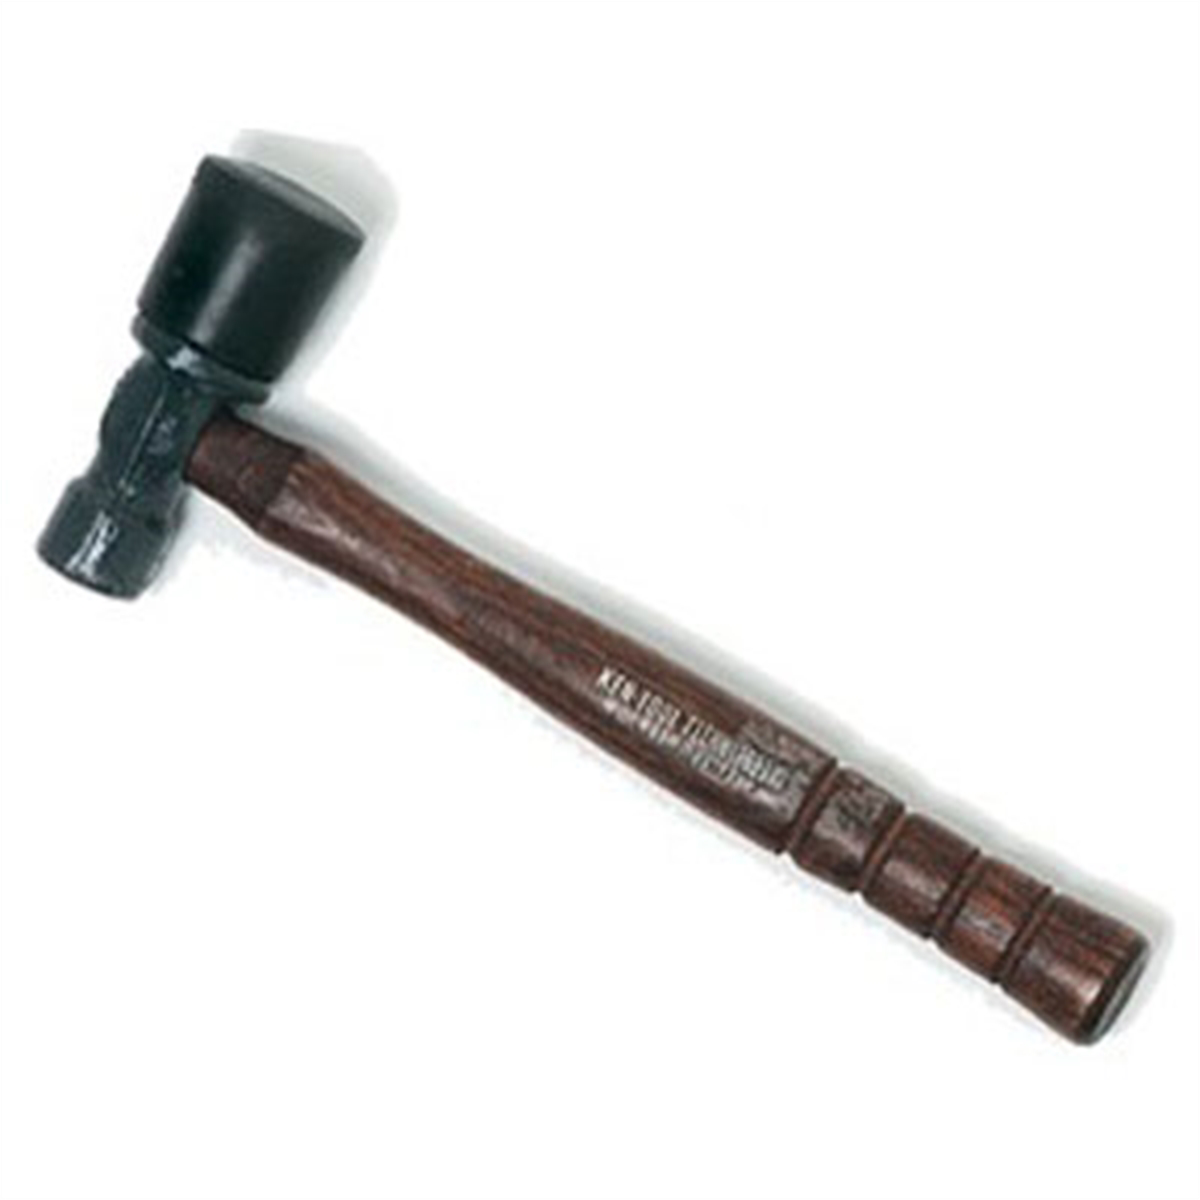 General Purpose Tire Hammer w/ Wood Handle T33R - 14 In - 2.3 Lb